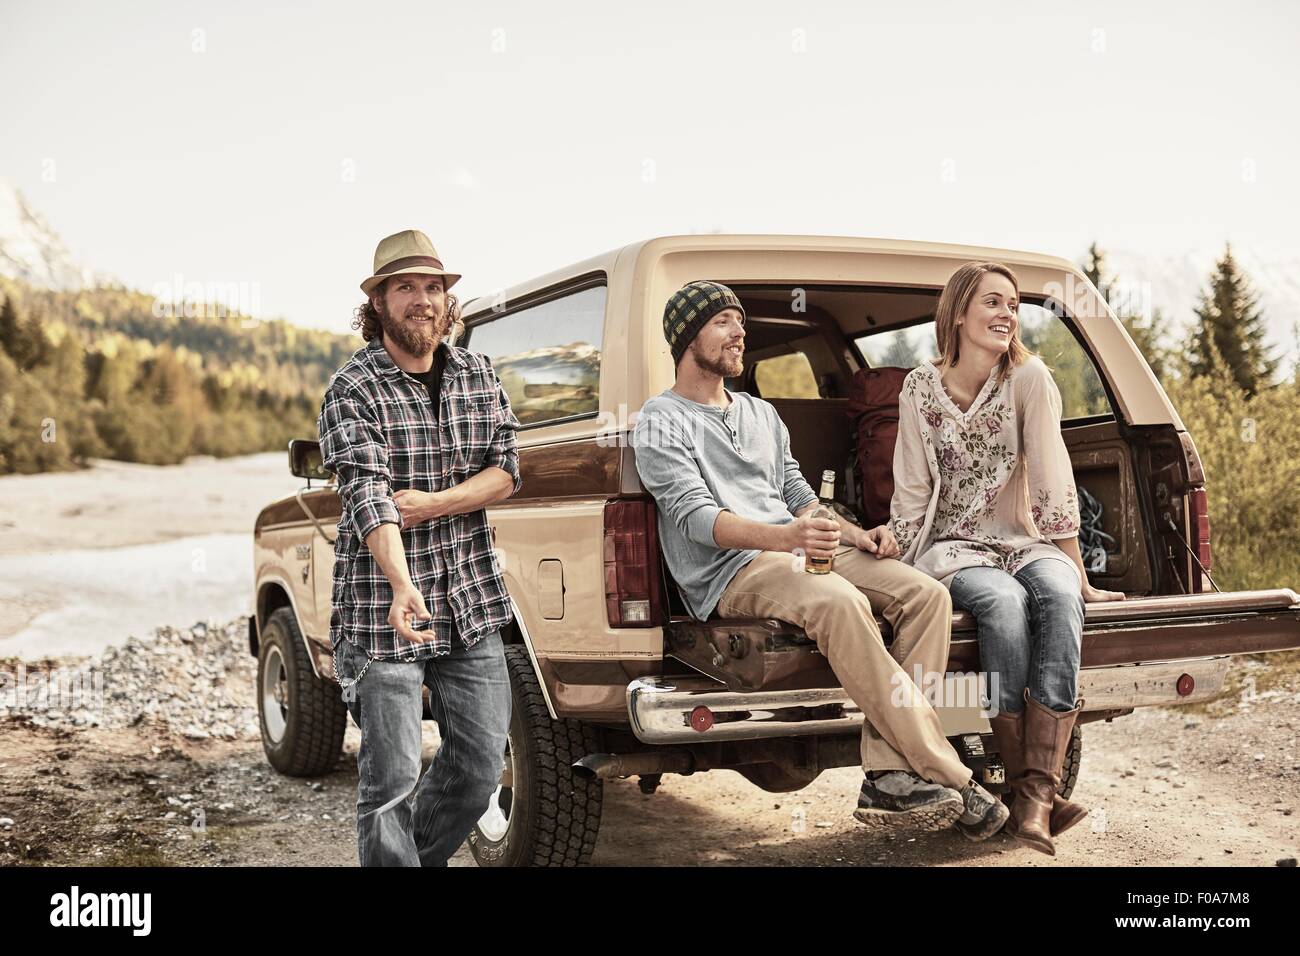 Three people sitting on back of pickup truck smiling Stock Photo